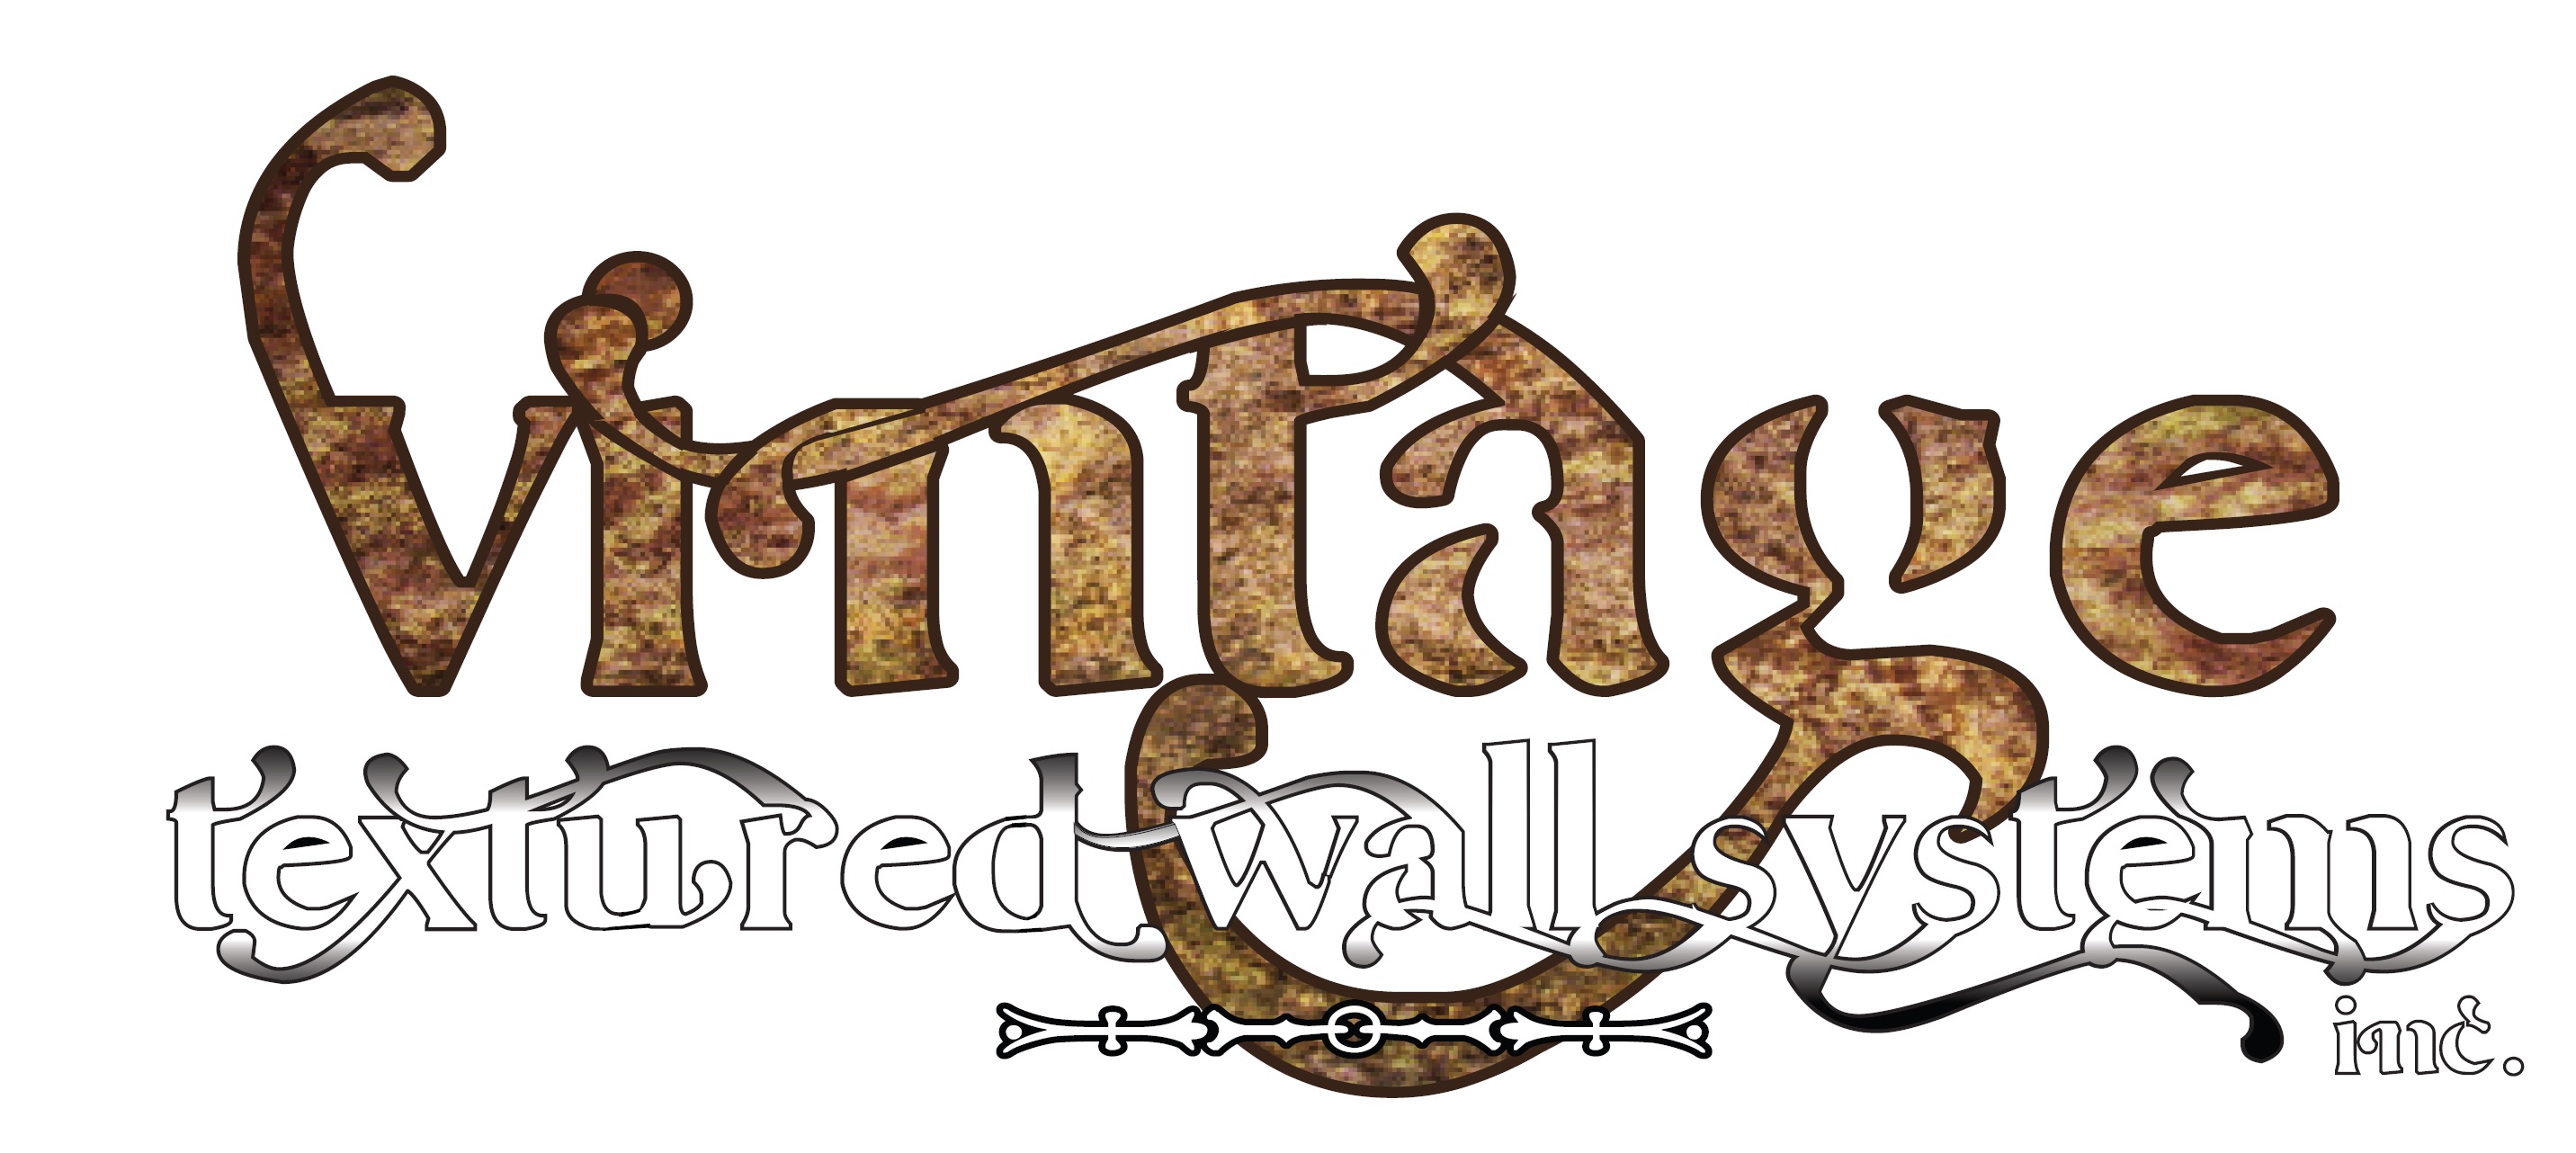 Vintage Textured Wall Systems Inc.